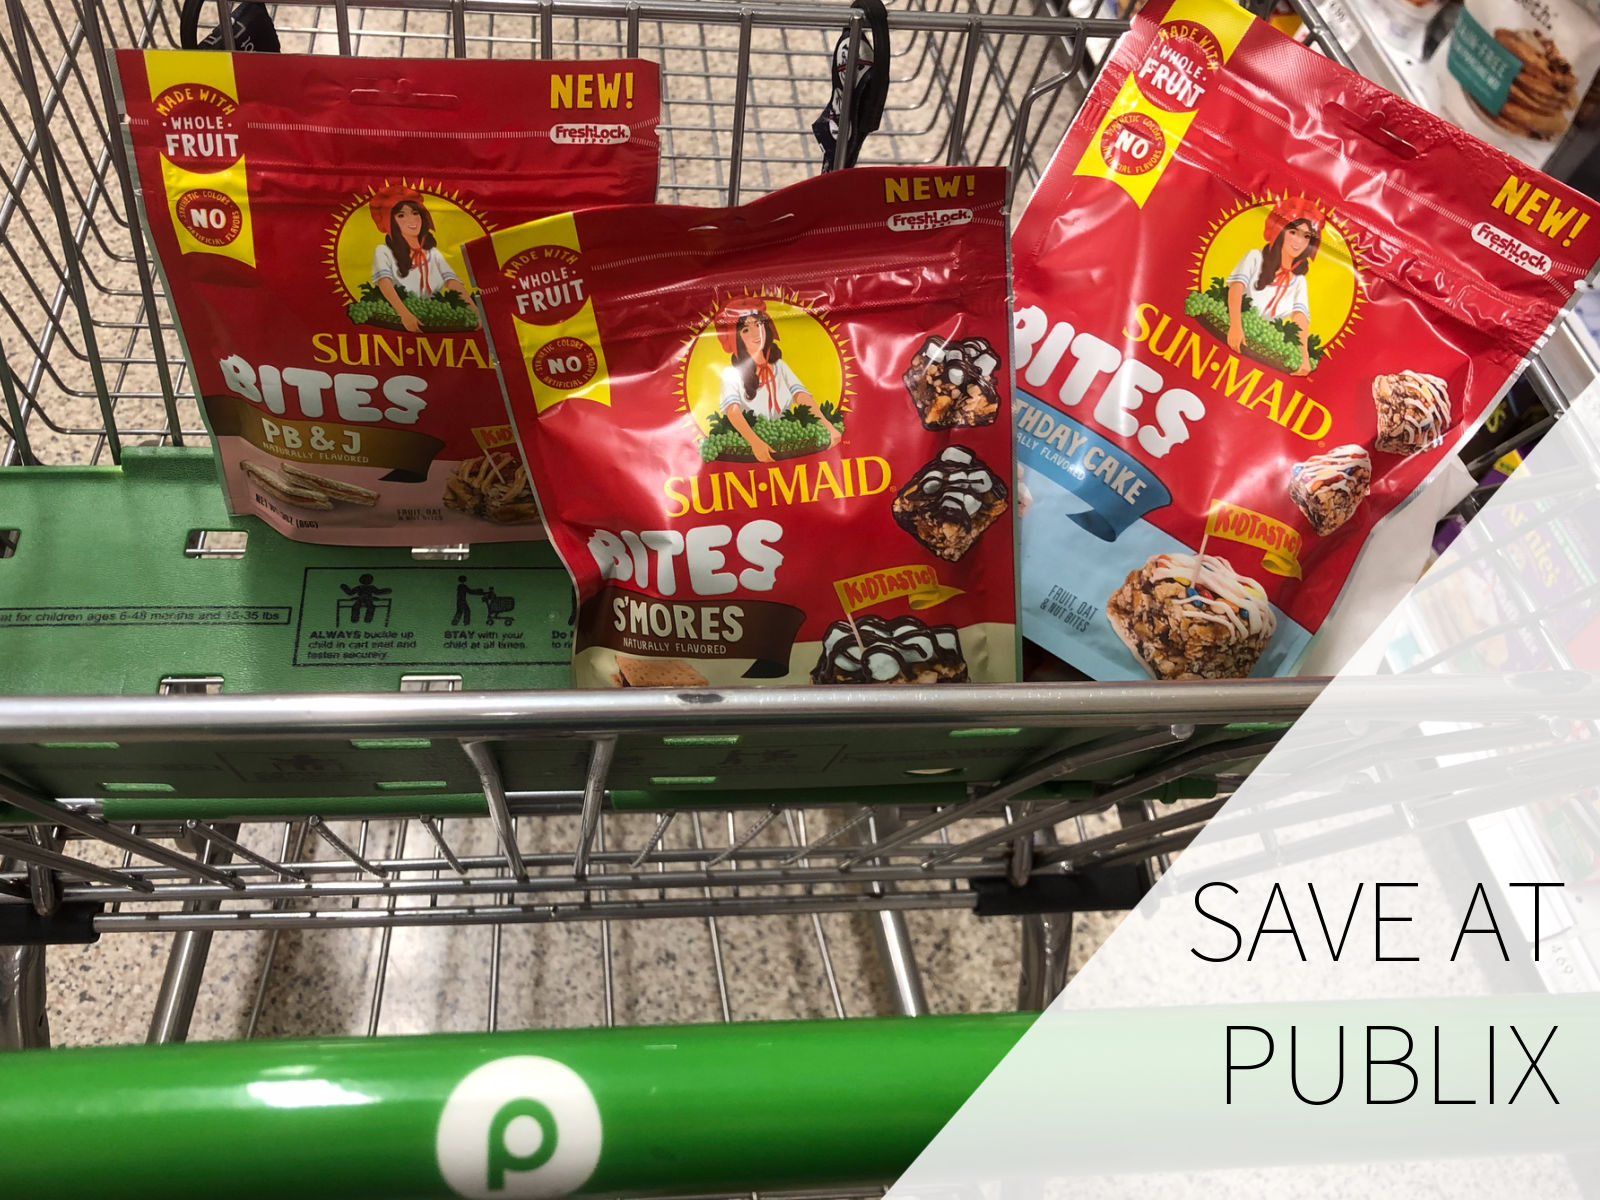 Pick Up Great-Tasting Sun-Maid Bites And Save Now At Publix